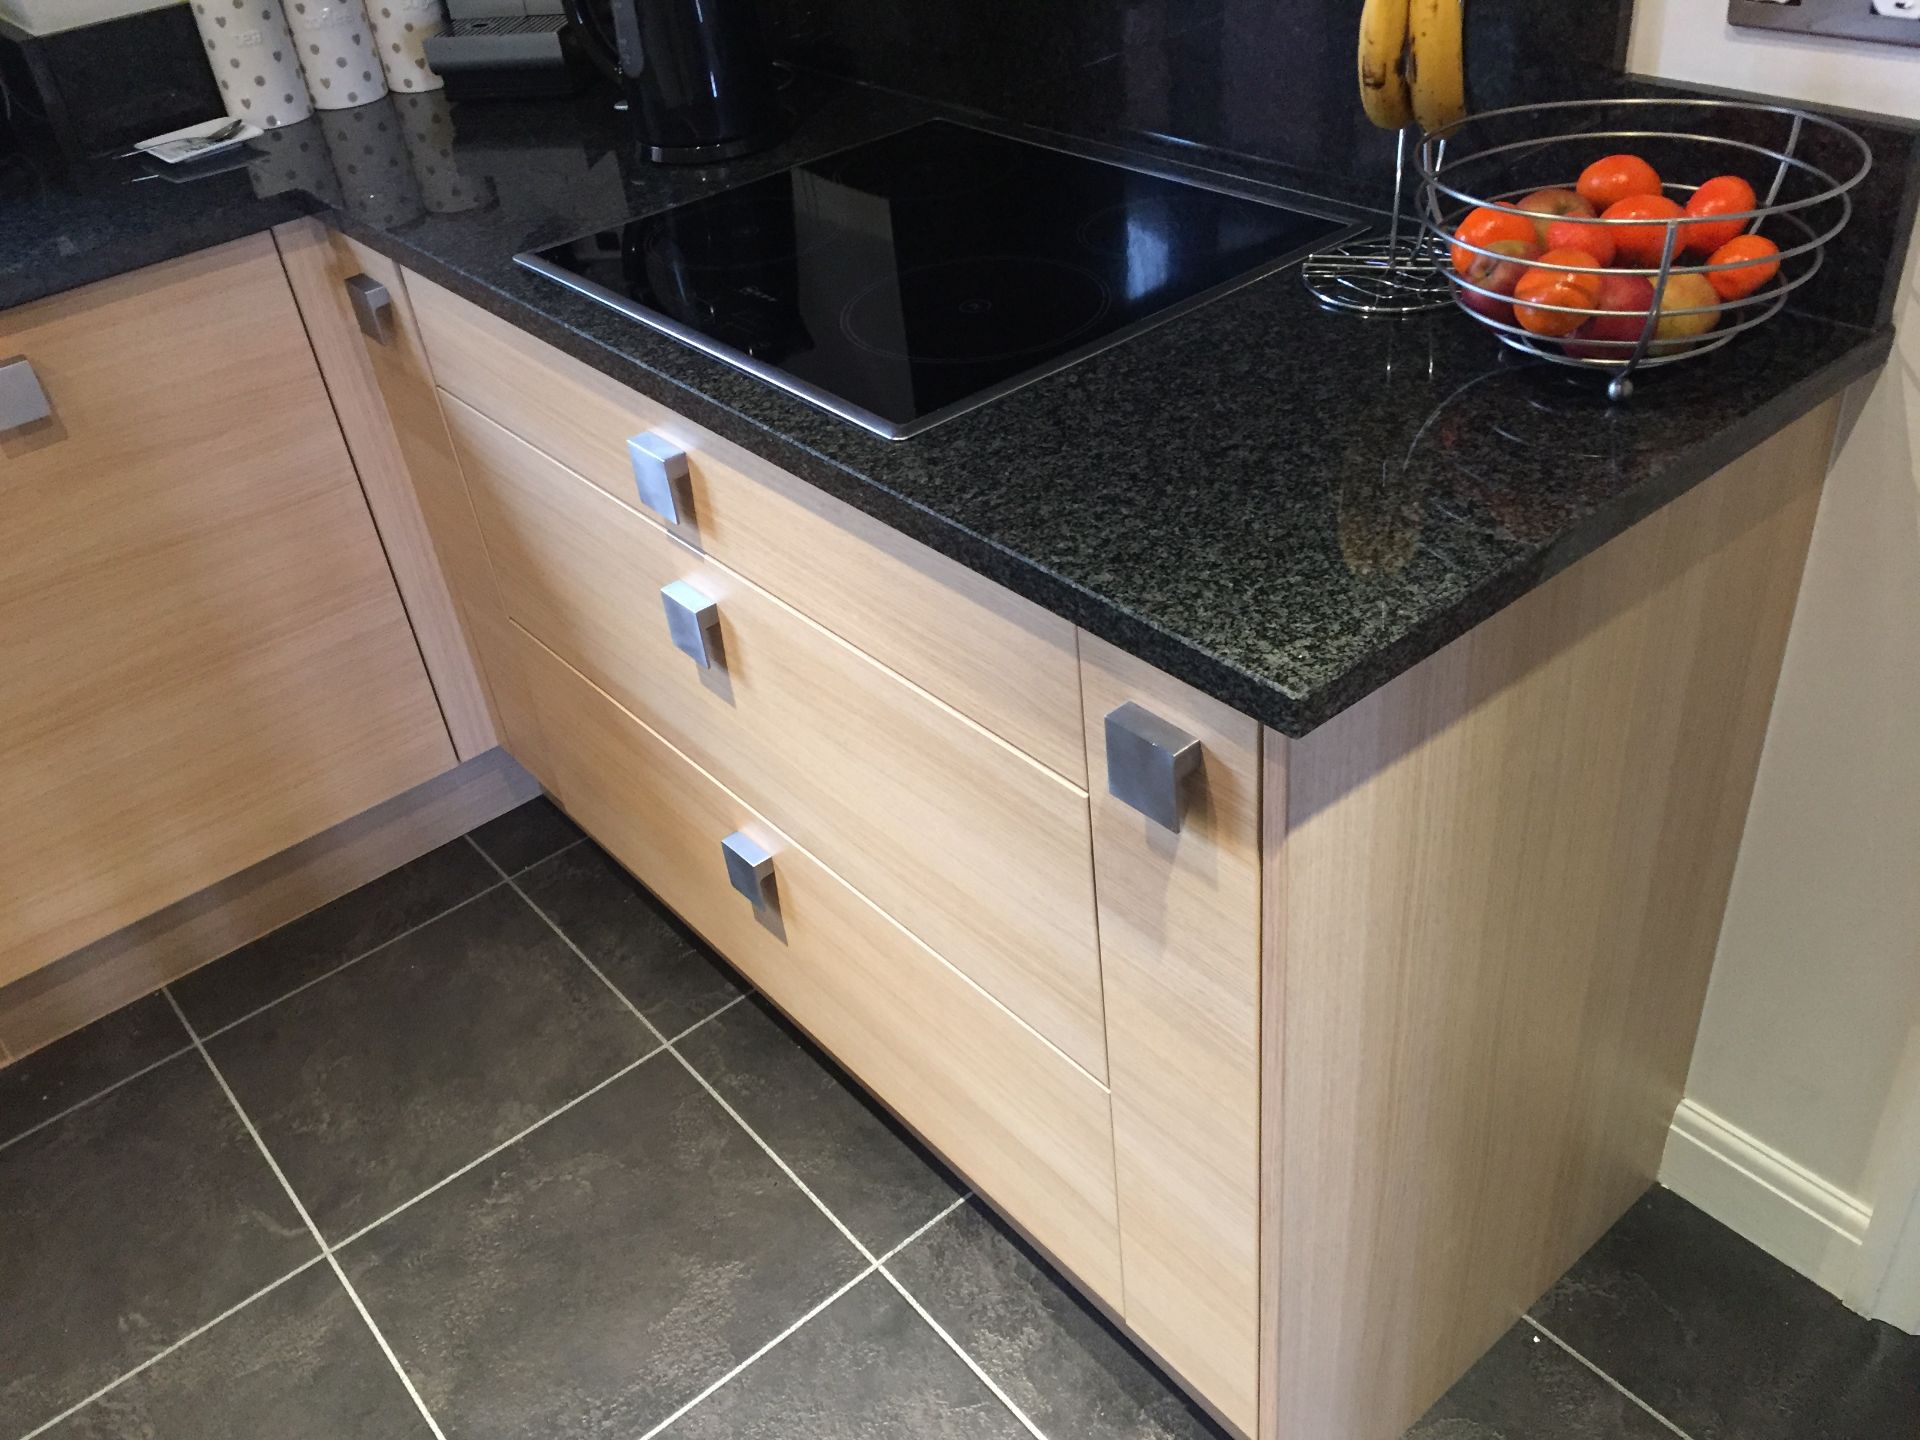 1 x Quality Hacker Kitchen With Neff Appliances And Black Granite worktop surfaces - Presented In - Image 6 of 41